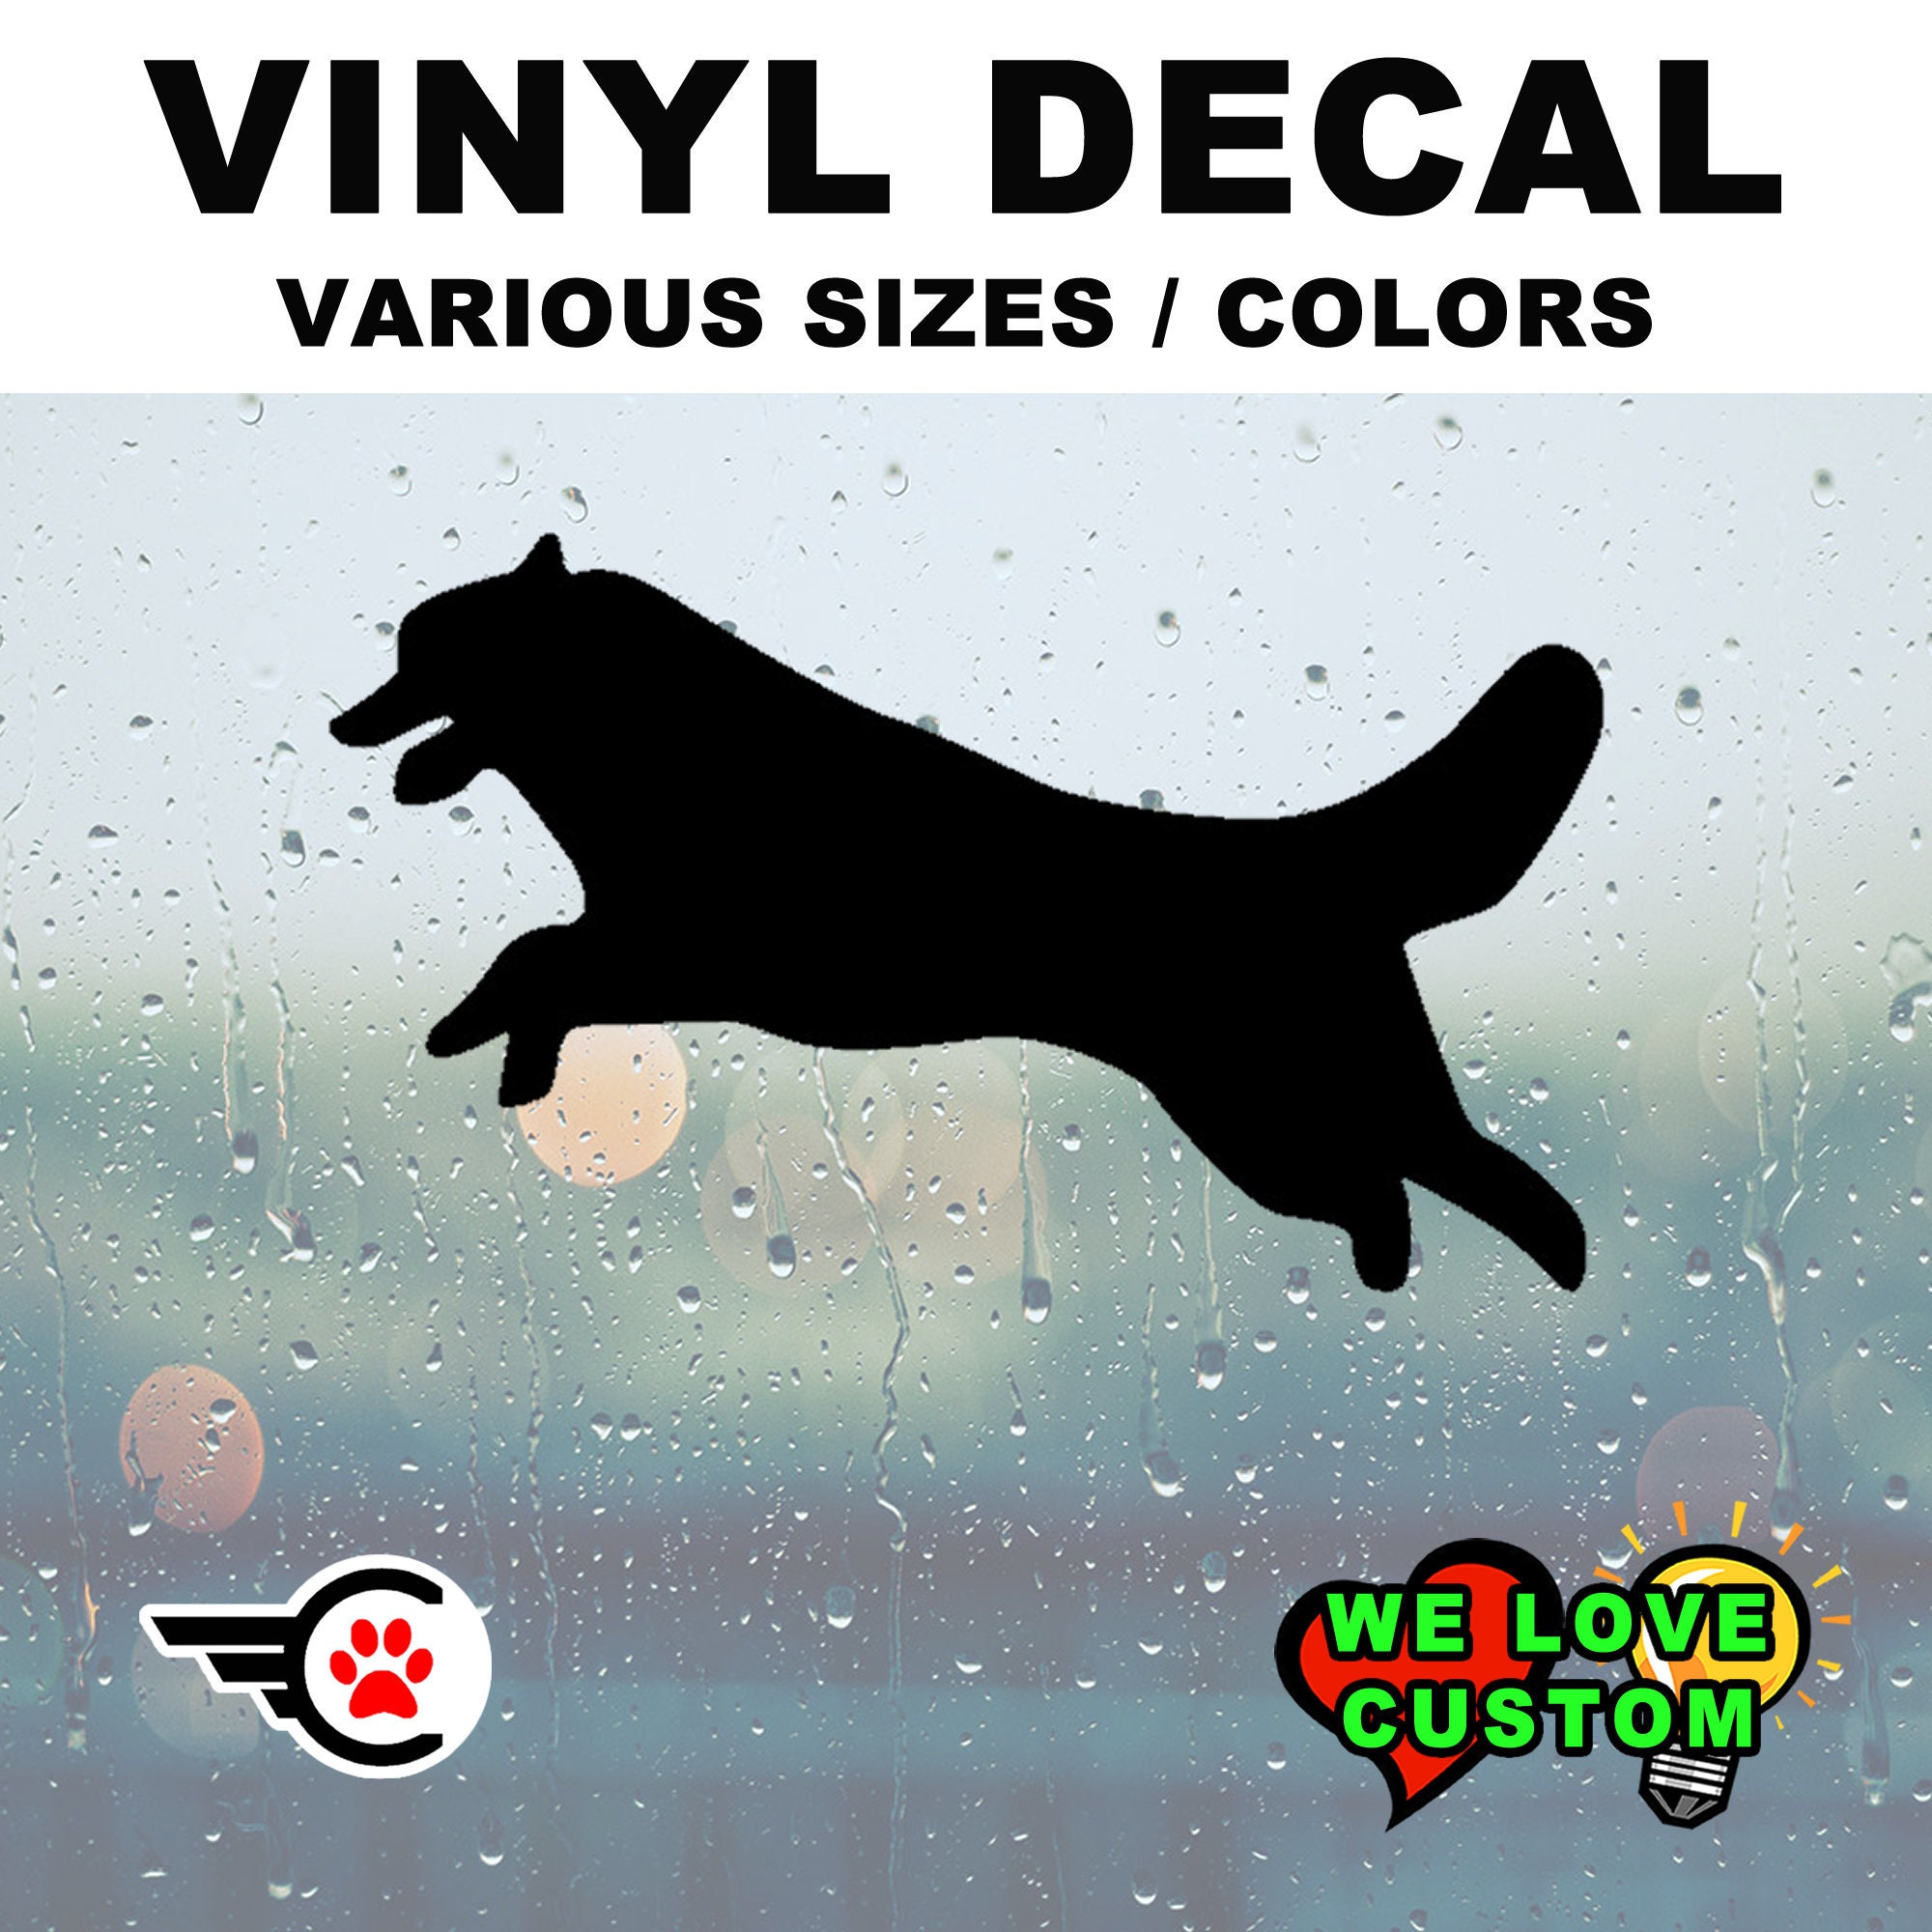 Husky Silhouette Vinyl Decal Various Sizes and Colors Die Cut Vinyl Decal also in Cool Chrome Colors!